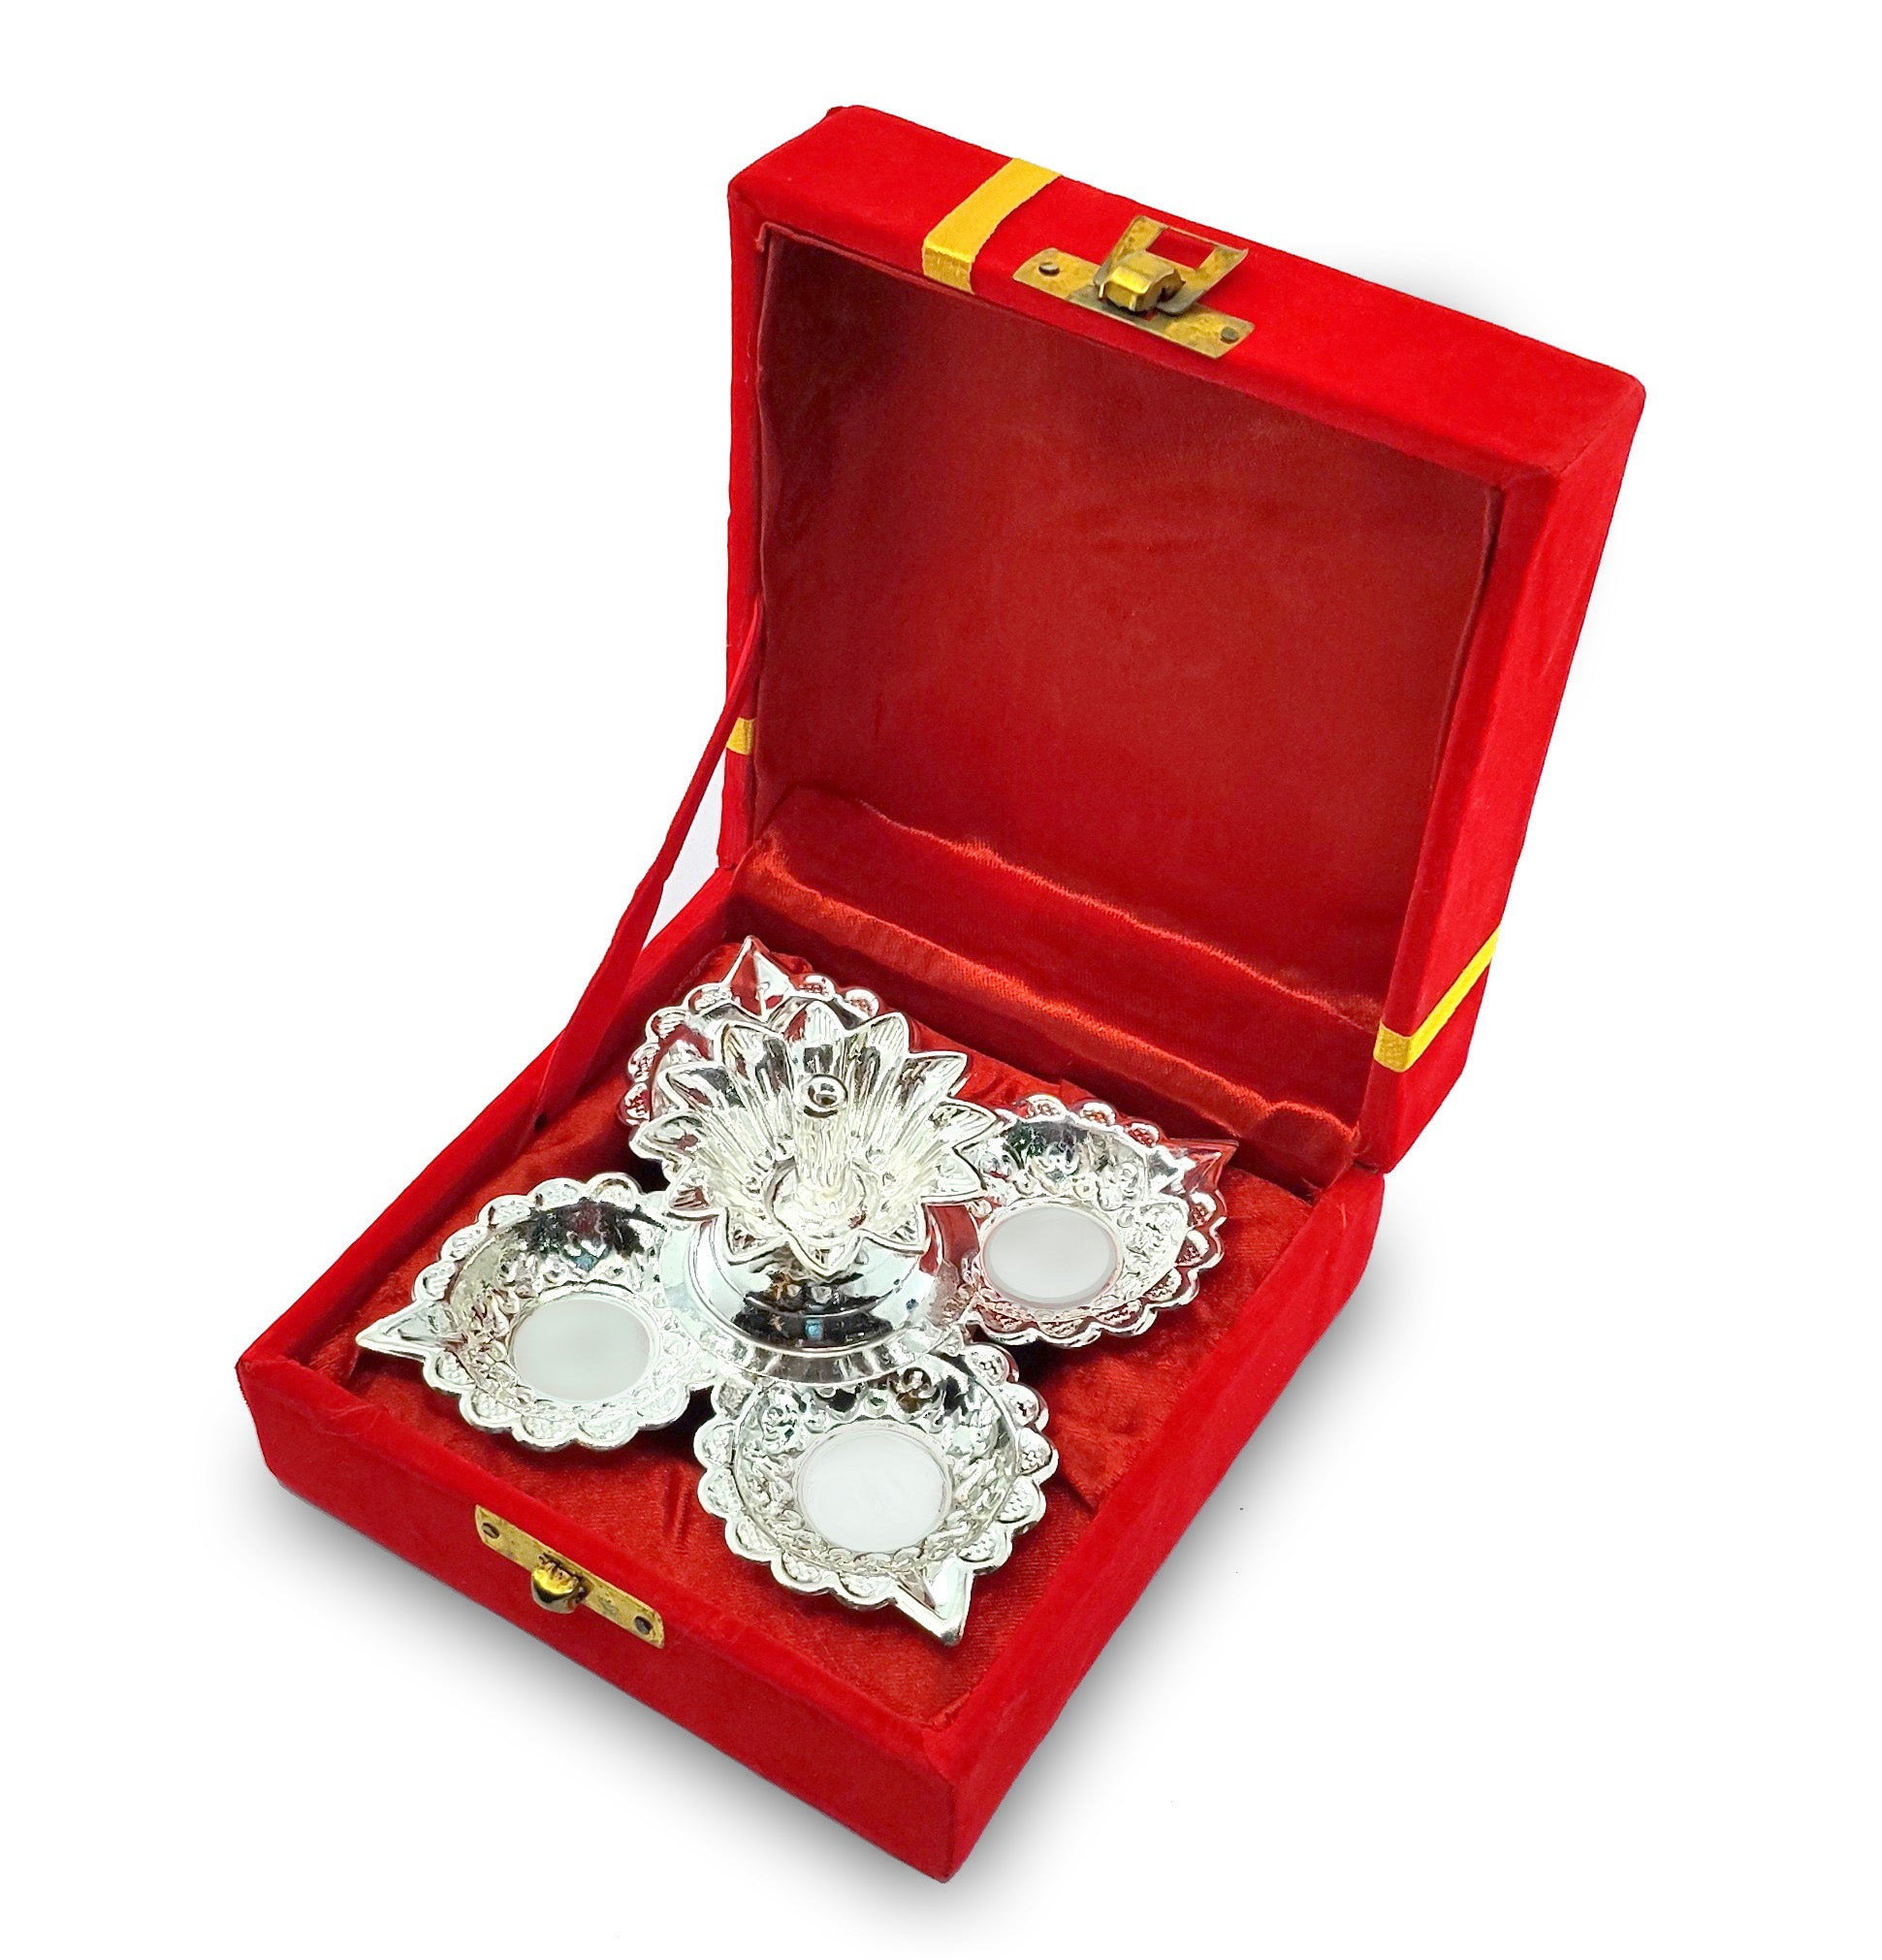 BENGALEN Silver Plated Panchmukhi Diya with Red Velvet Gift Box Pooja Items Diwali Decoration Puja Gifts Handmade Gift Items